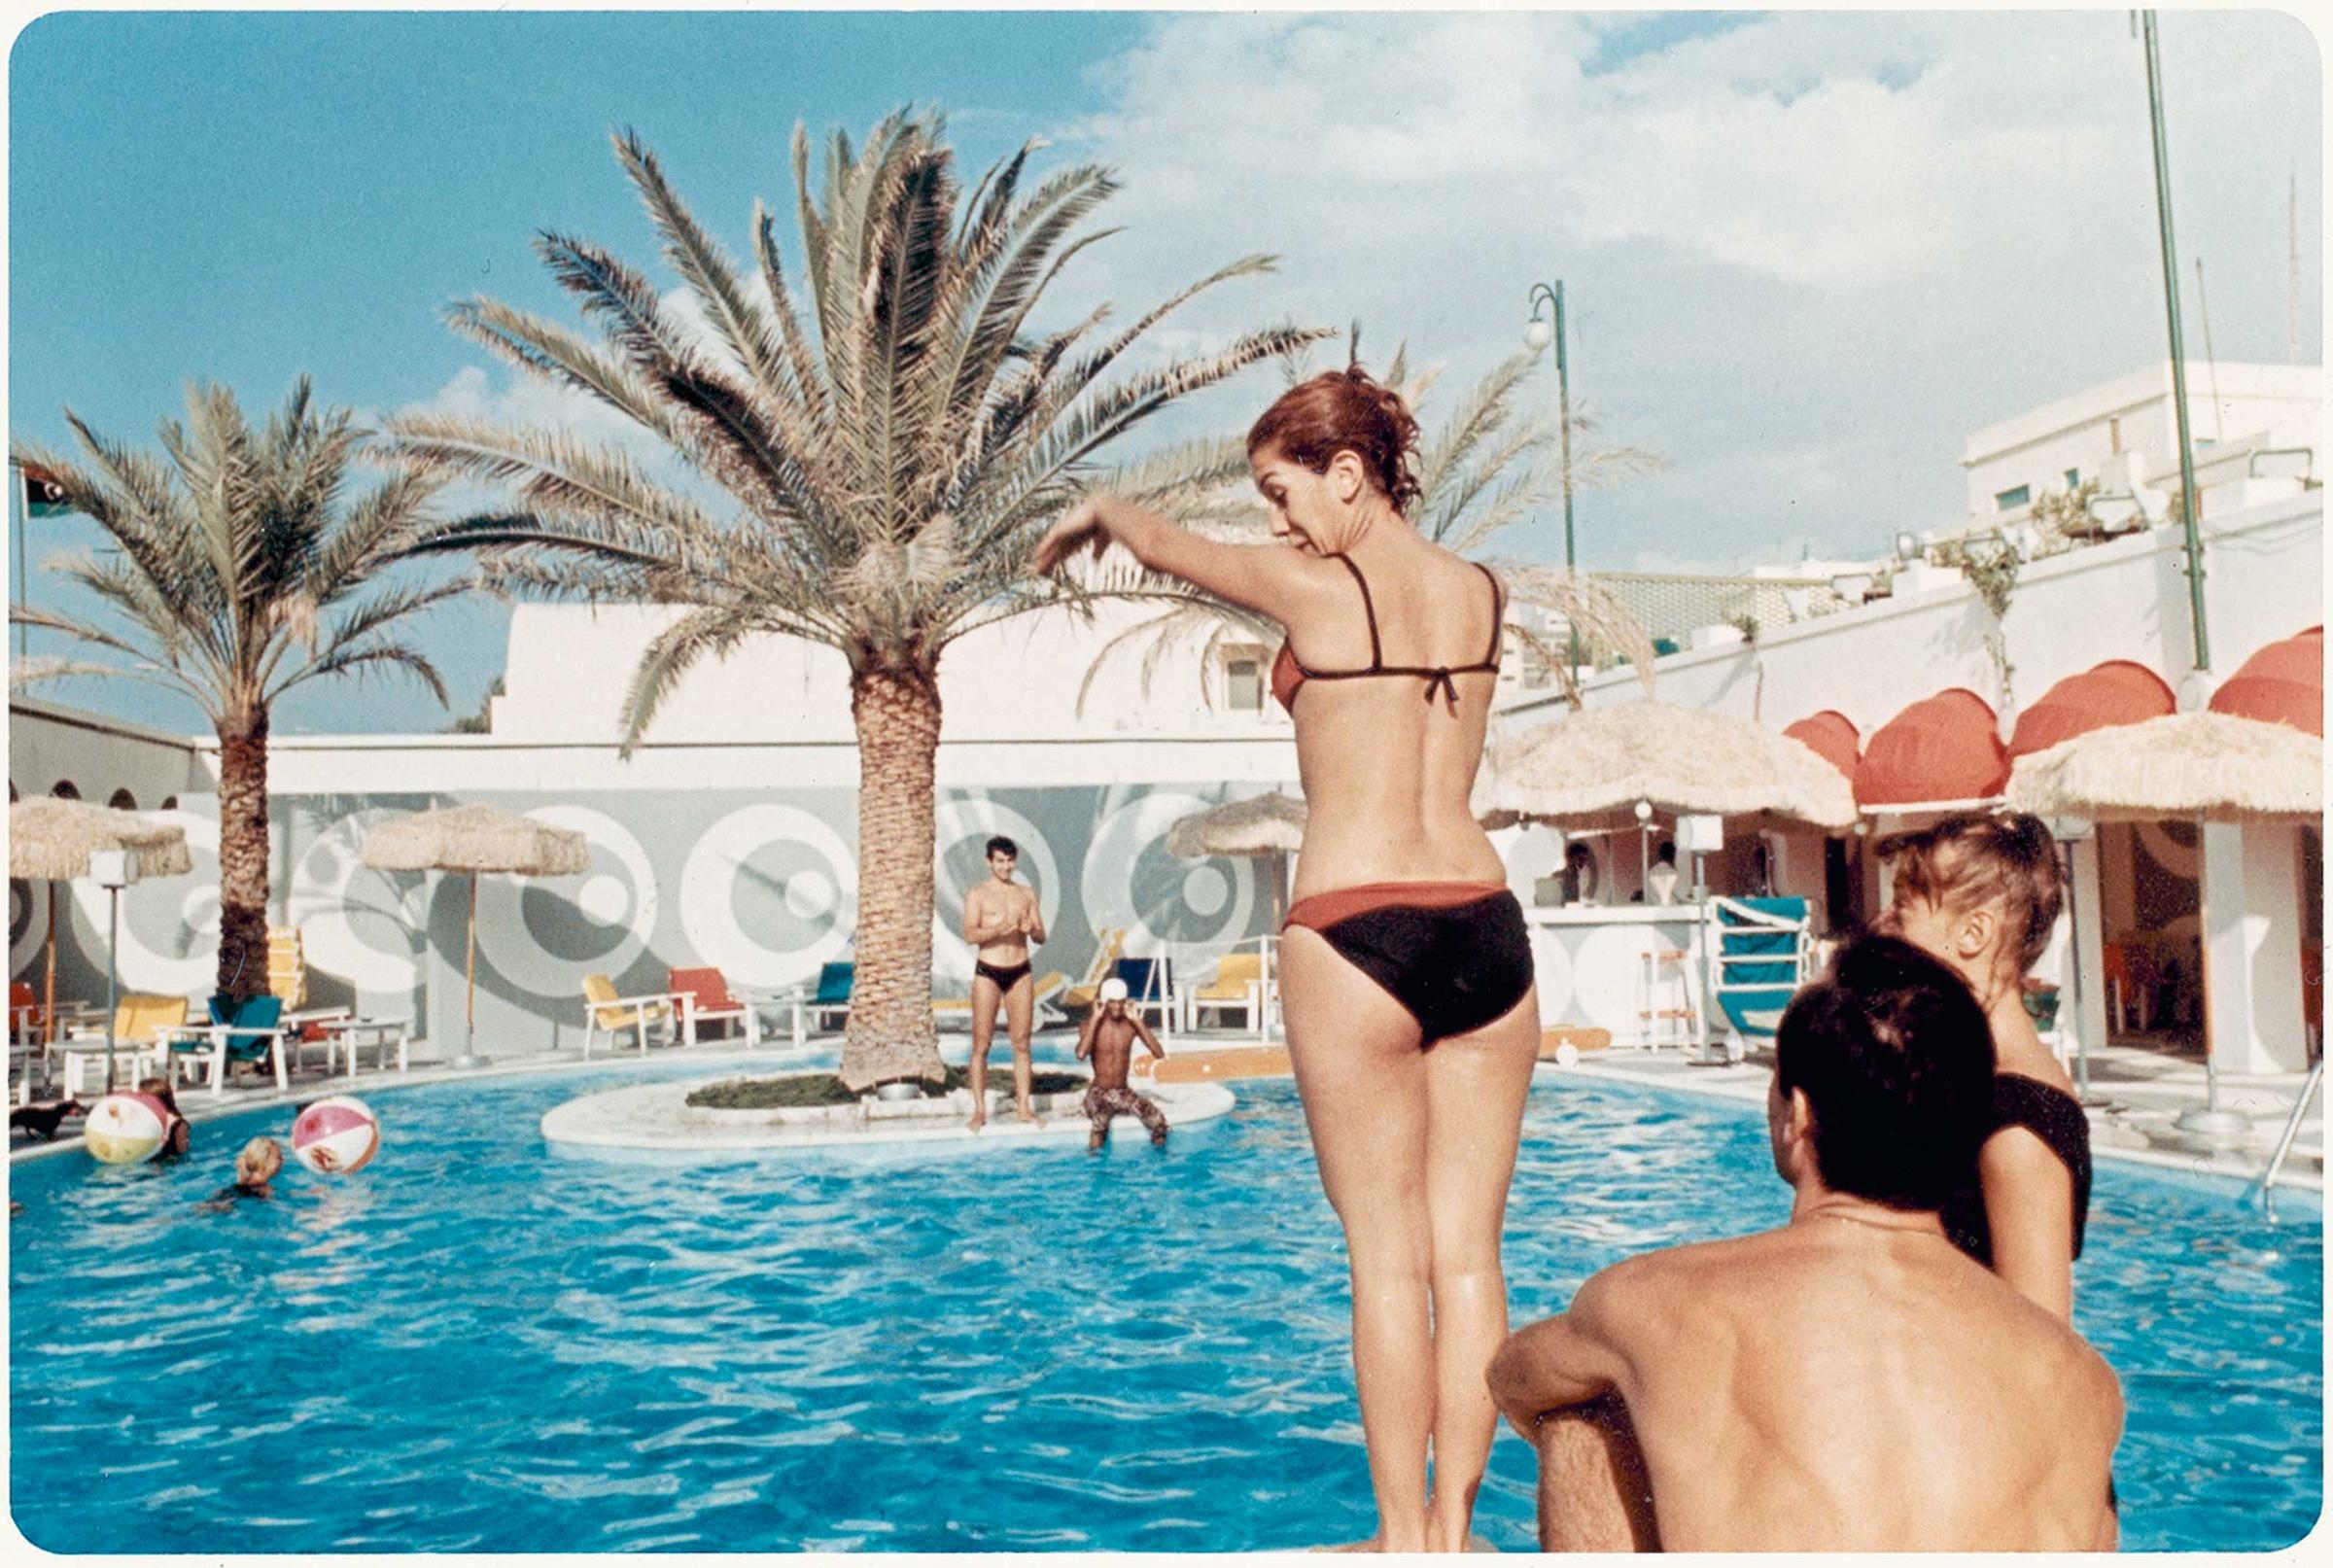 The Uaddan Hotel swimming pool was the center stage for cosmopolitan Libyans